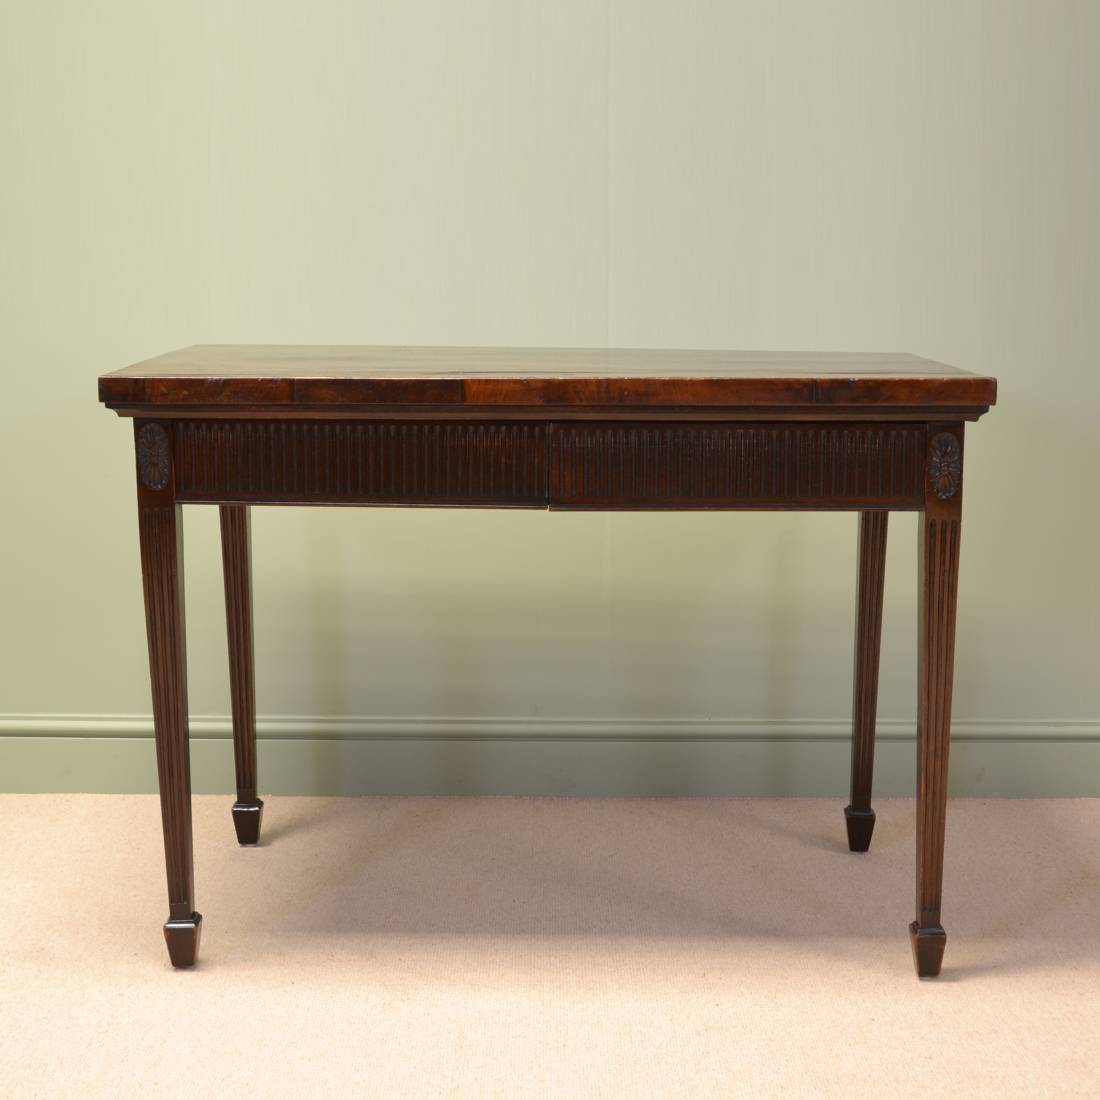 Edwardian Antique Mahogany Side / Console Table By Druce And Co.